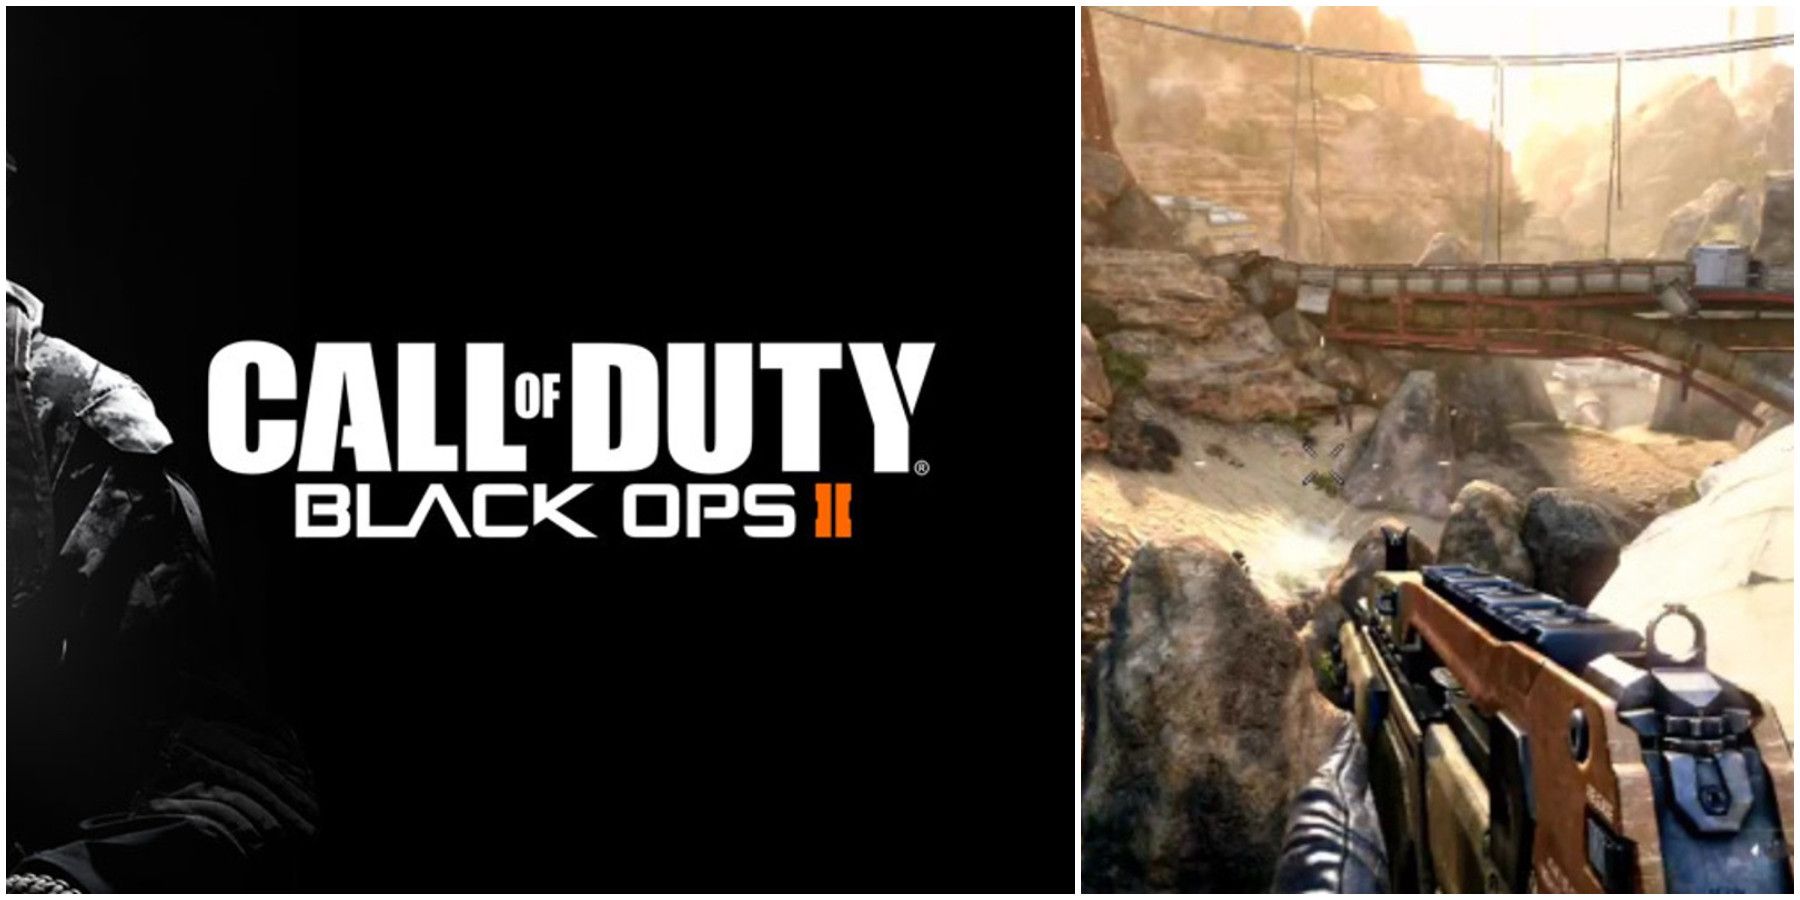 Call of Duty Black Ops II Campaign